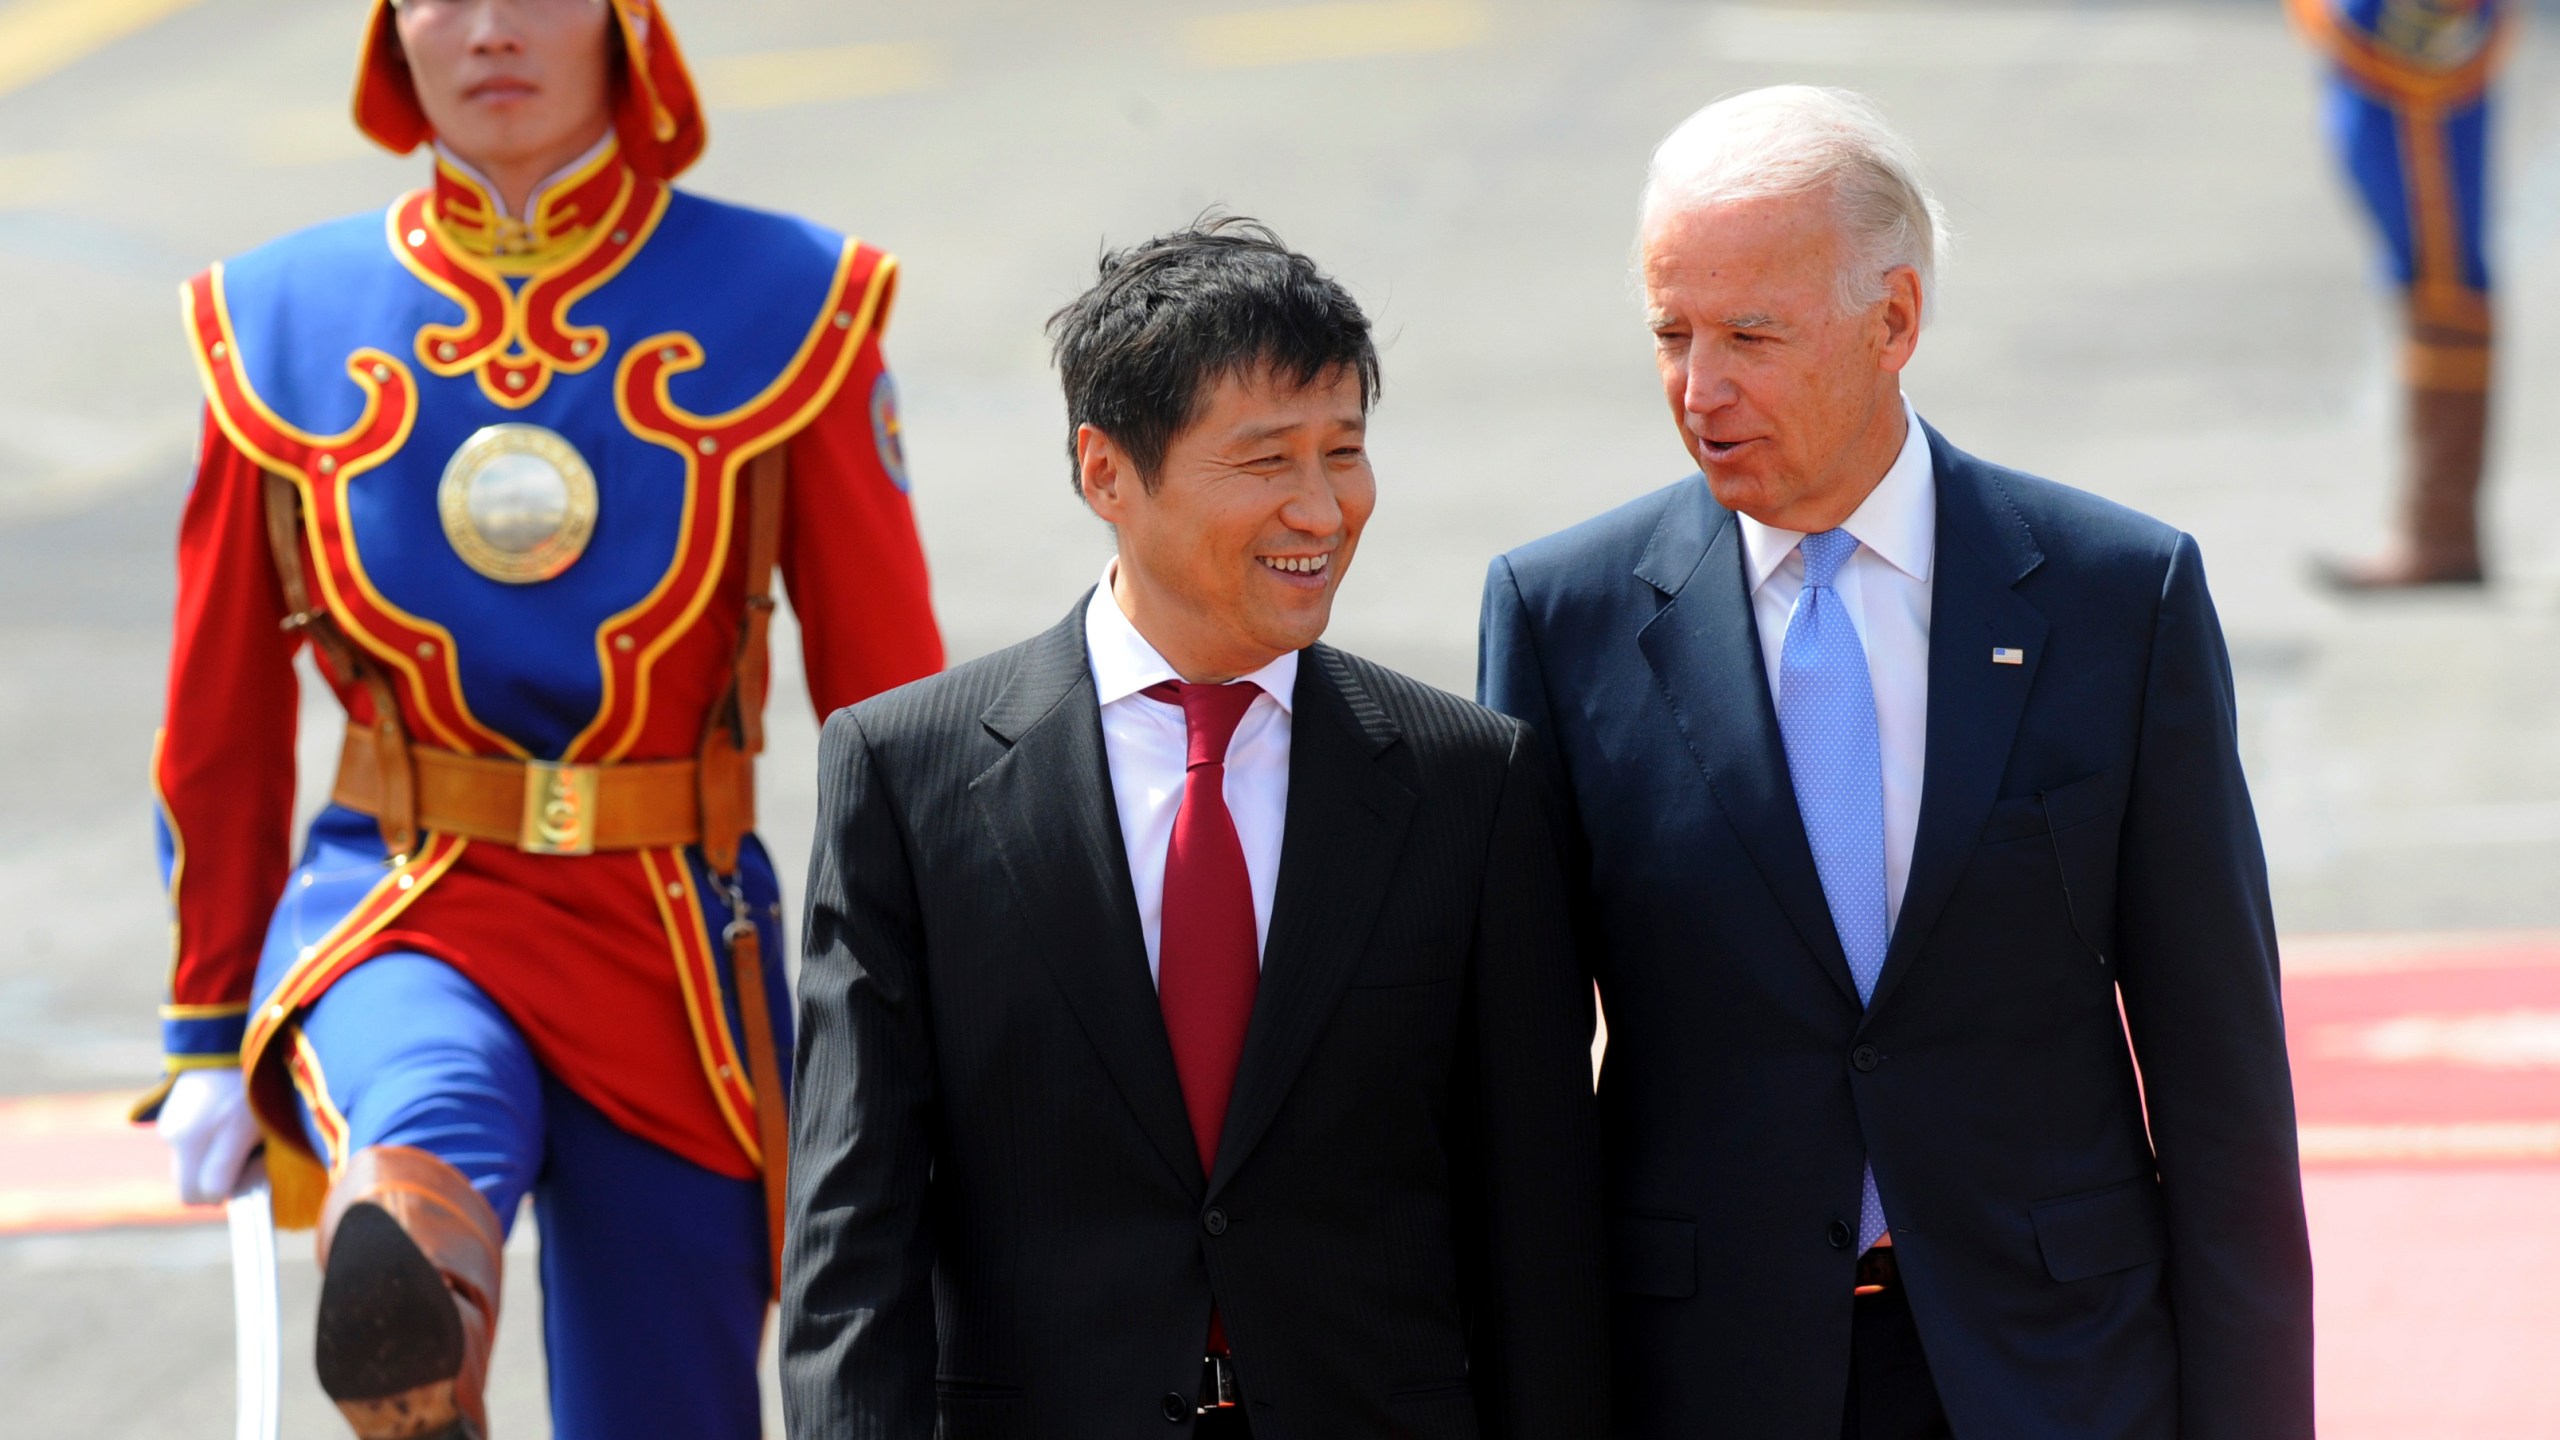 FILE - U.S. Vice President Joe Biden, right, shares a light moment with Mongolian Prime Minister Sukhbaatar Batbold in Ulan Bator, Mongolia, Aug. 22, 2011. The release of a transcript of Biden's interview with prosecutors investigating his handling of classified documents offers a rare window into the day-to-day life for the president. One question morphed into a well-worn tale of that one time he "embarrassed the hell" out of the leader of Mongolia. (AP Photo/Goh Chai Hin, Pool)